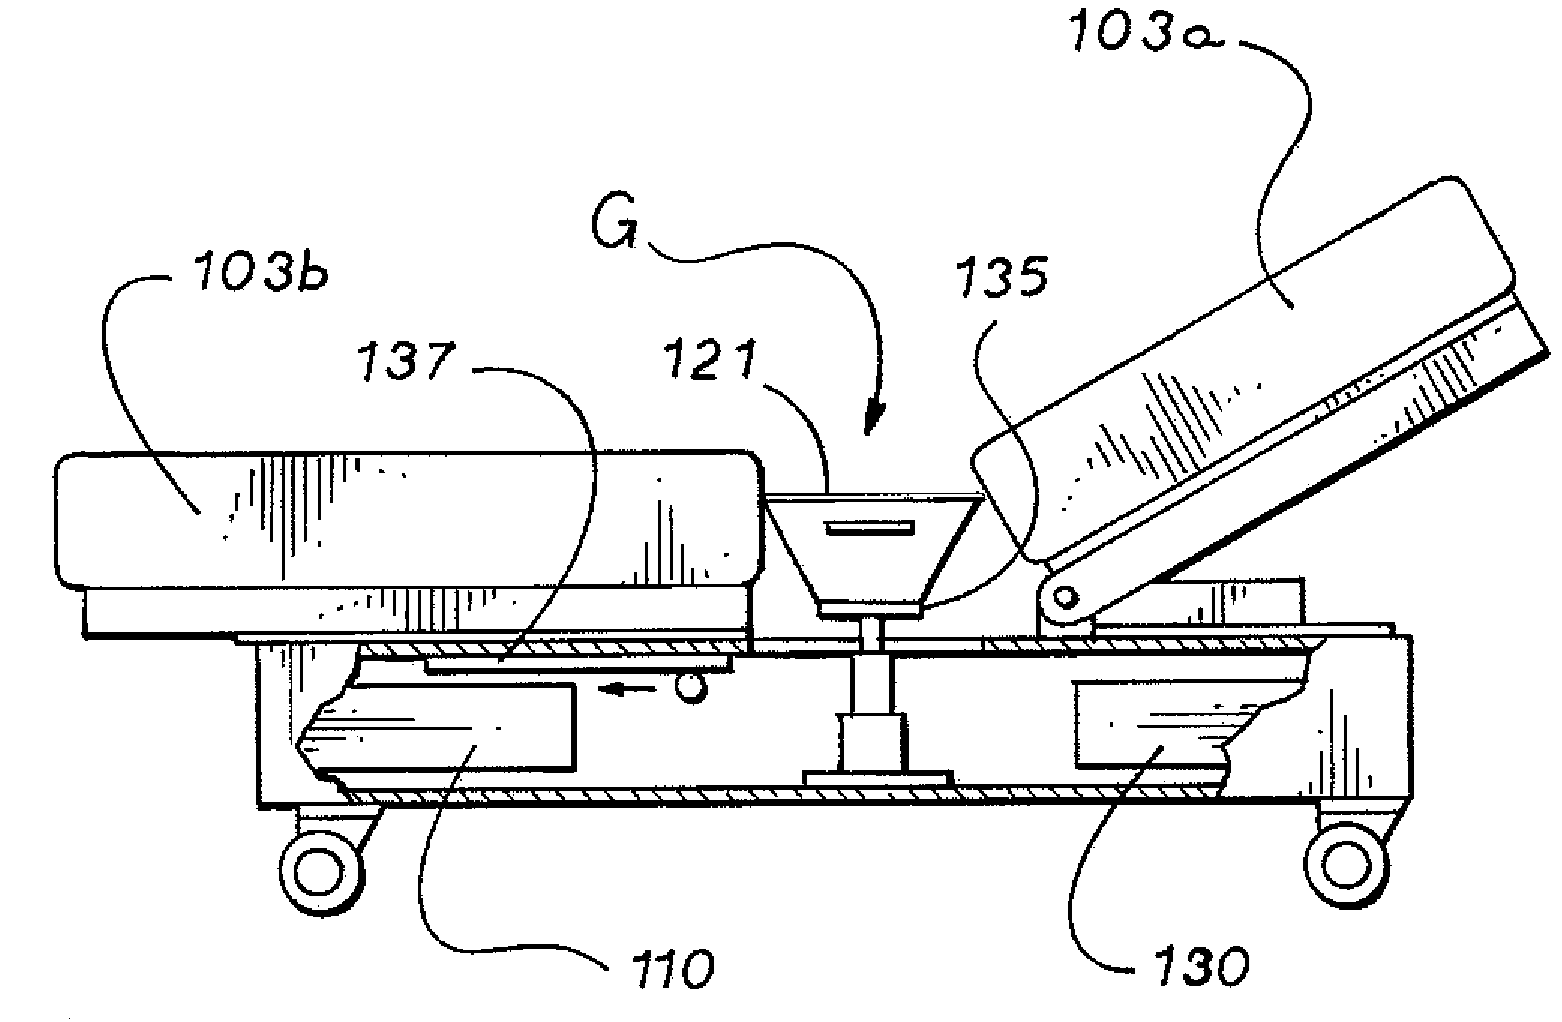 Automated bedpan system and method therefor